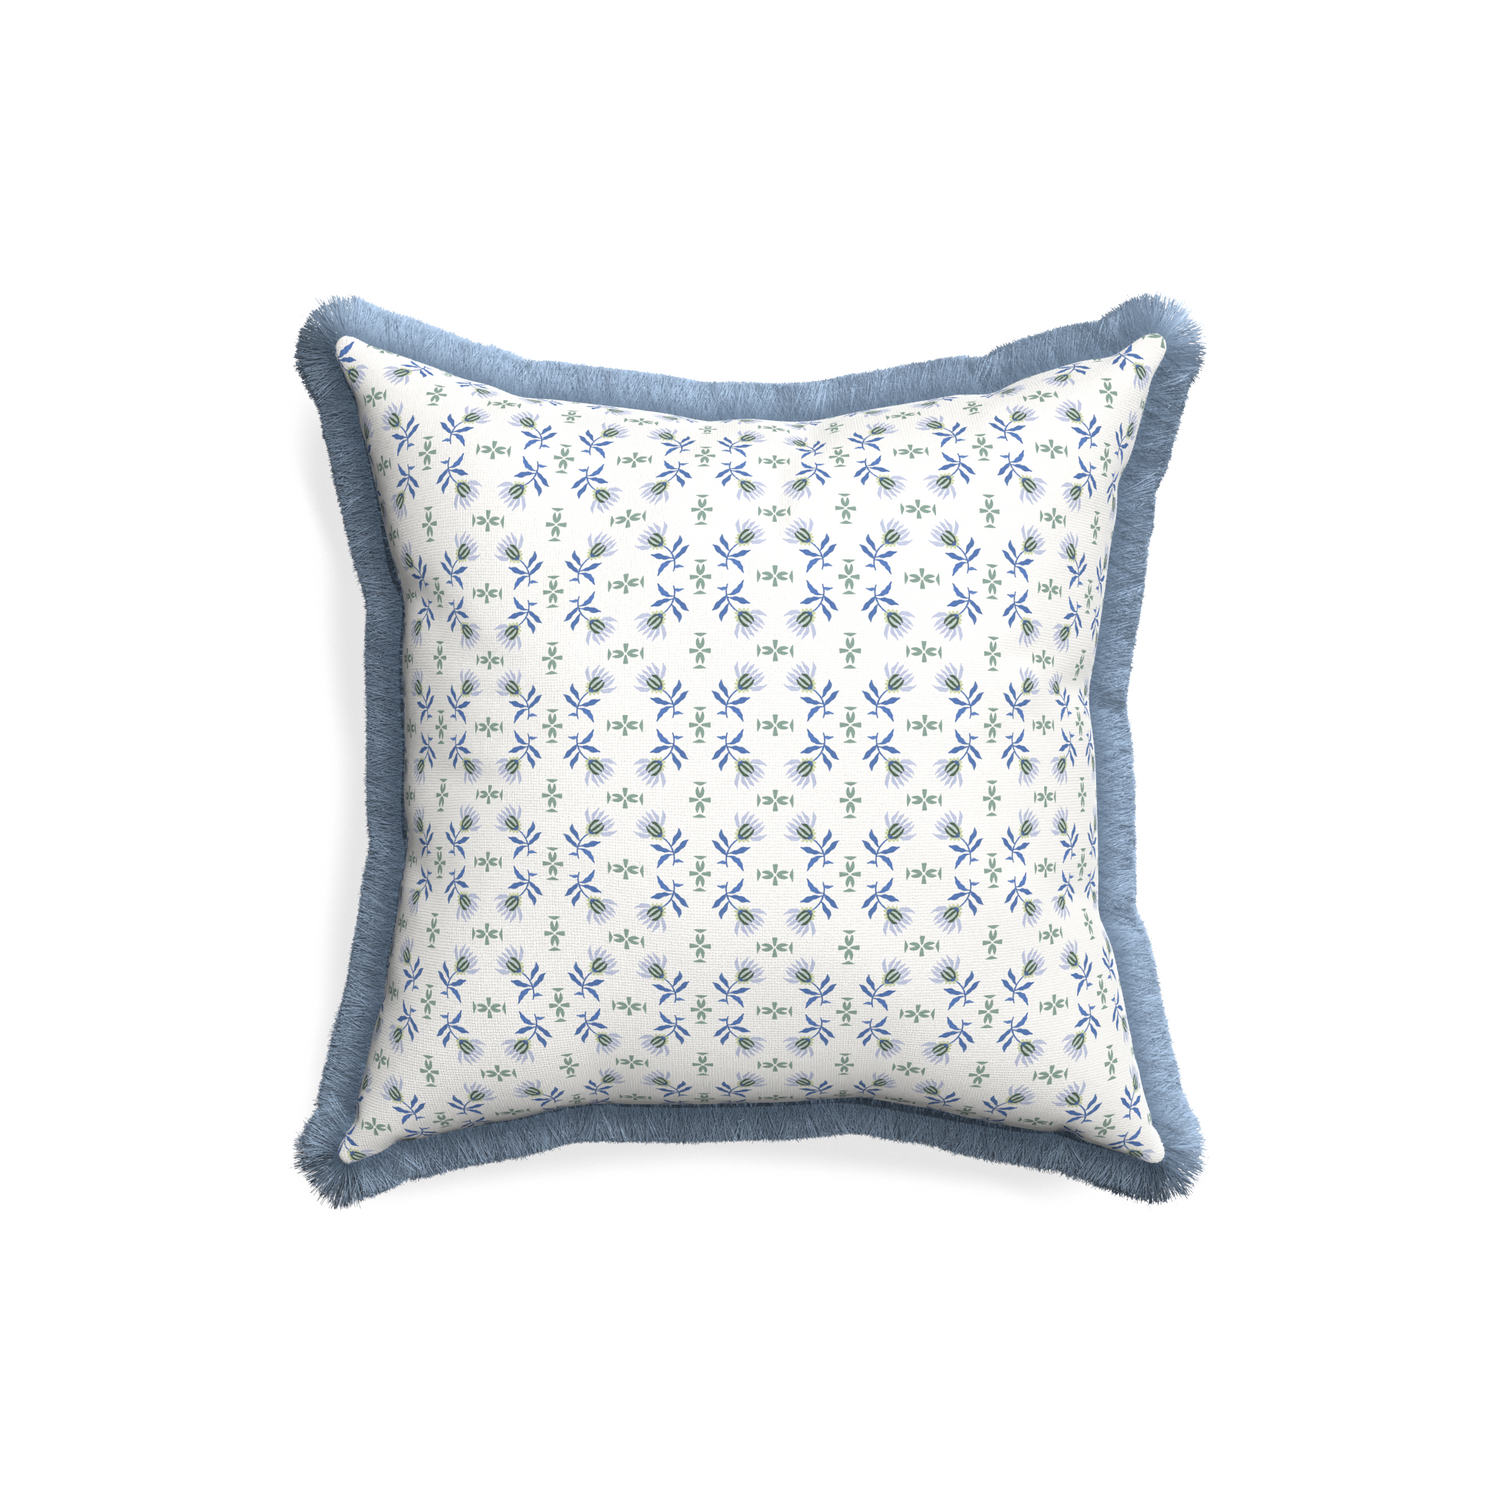 18-square lee custom pillow with sky fringe on white background